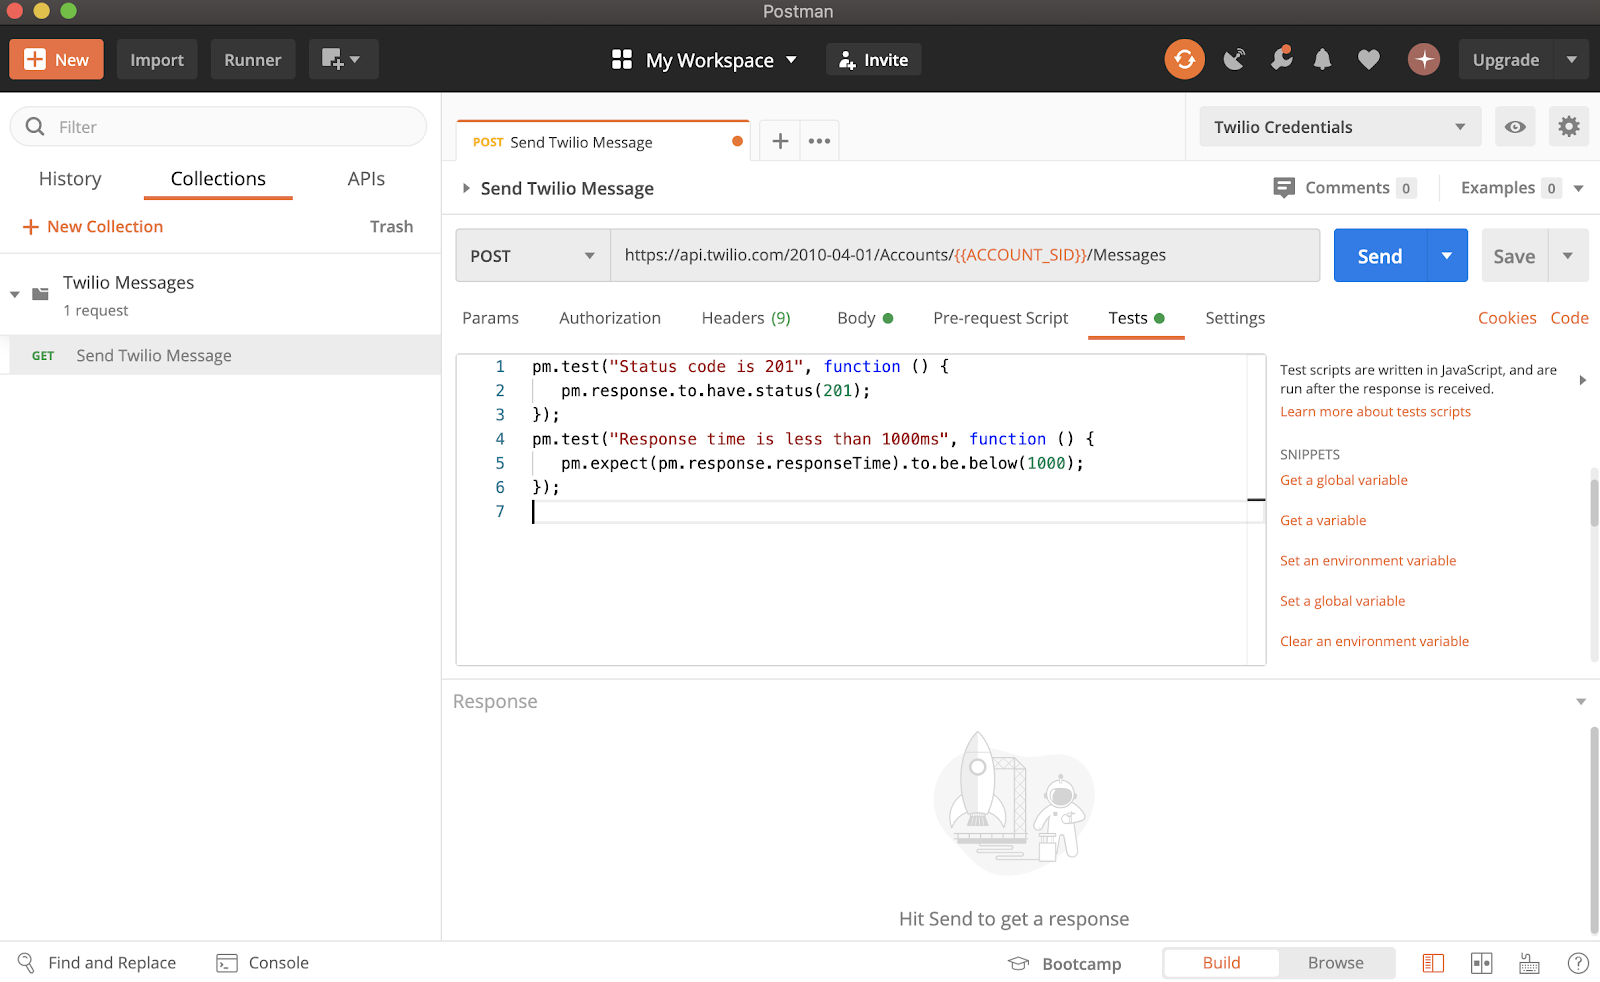 postman dashboard showing code snippets of the tests tab